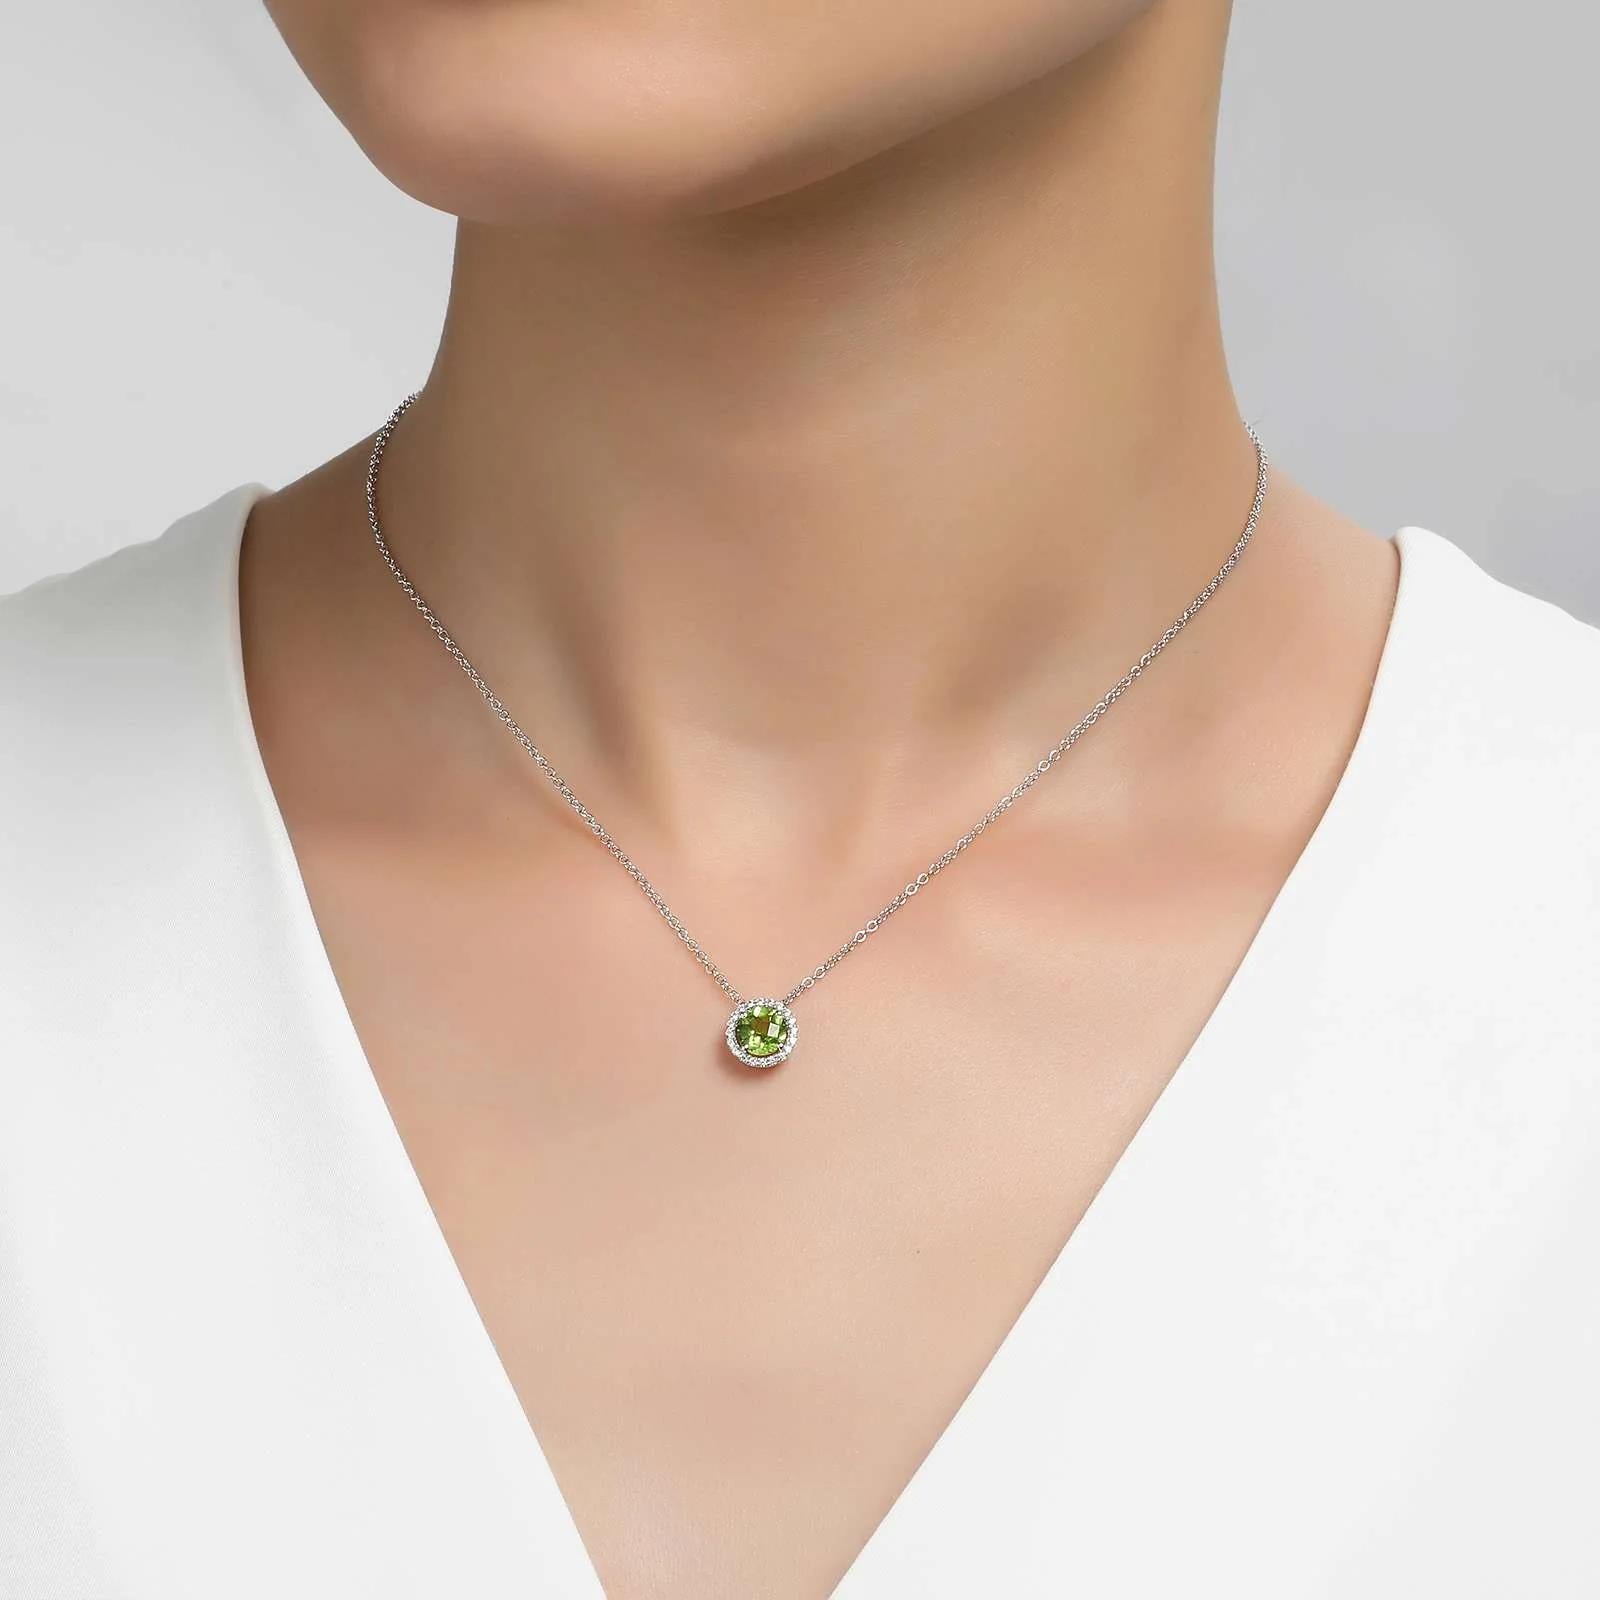 Sterling Silver August Birthstone Necklace - Warwick Jewelers